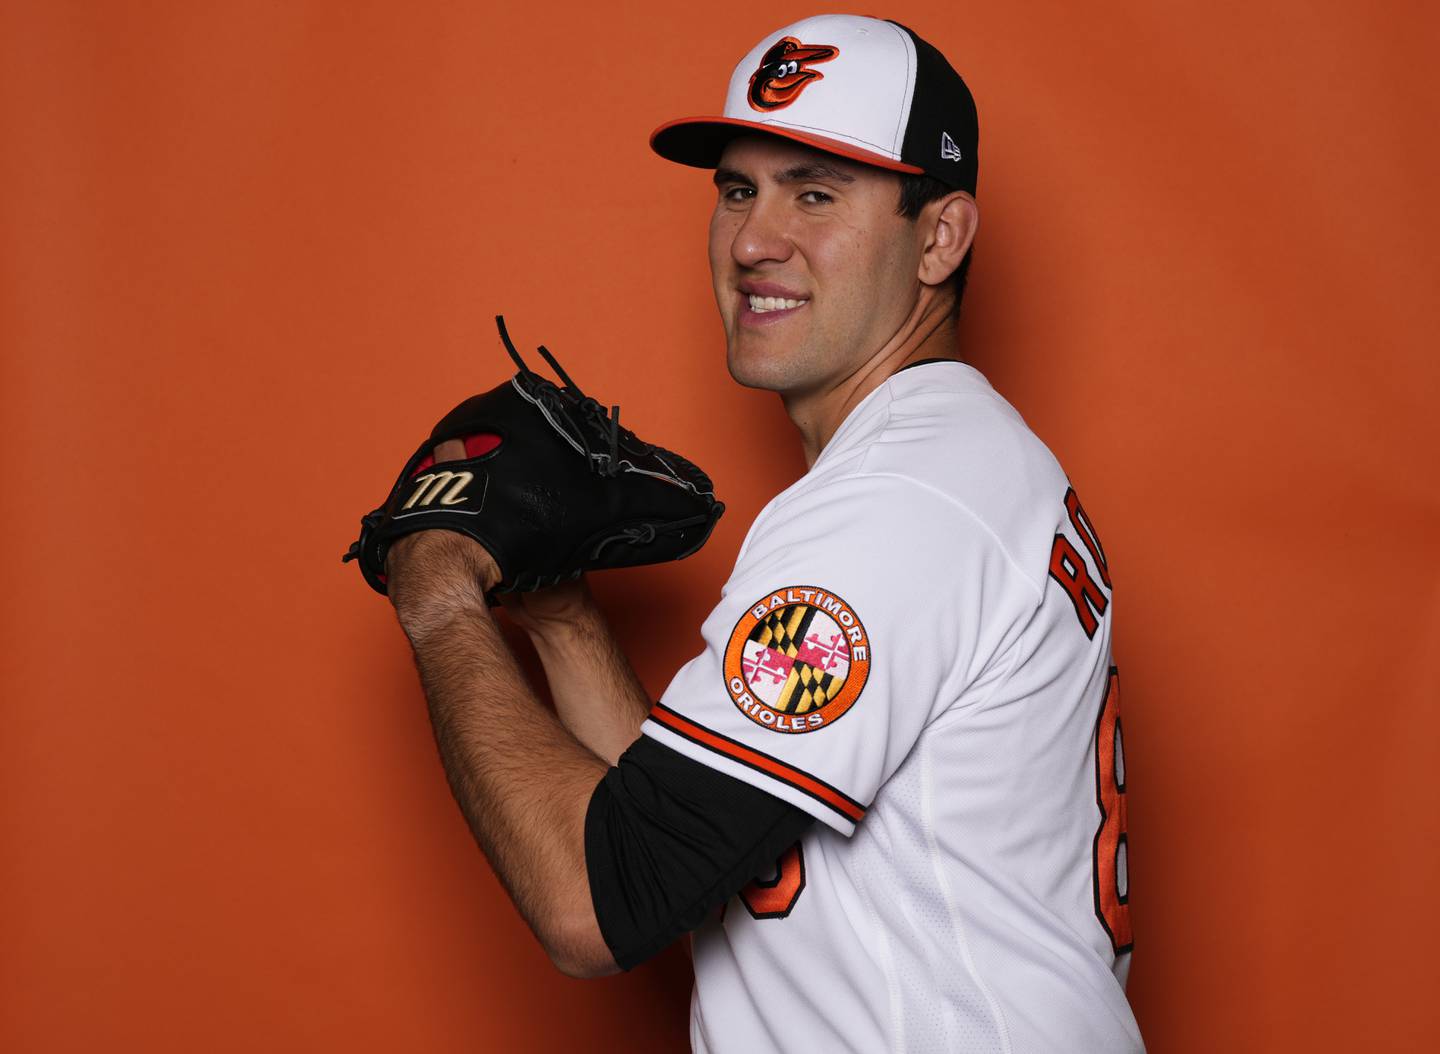 SARASOTA, FLORIDA - MARCH 17: Grayson Rodriguez #85 of the Baltimore Orioles poses for a portrait during Photo Day at Ed Smith Stadium on March 17, 2022 in Sarasota, Florida.